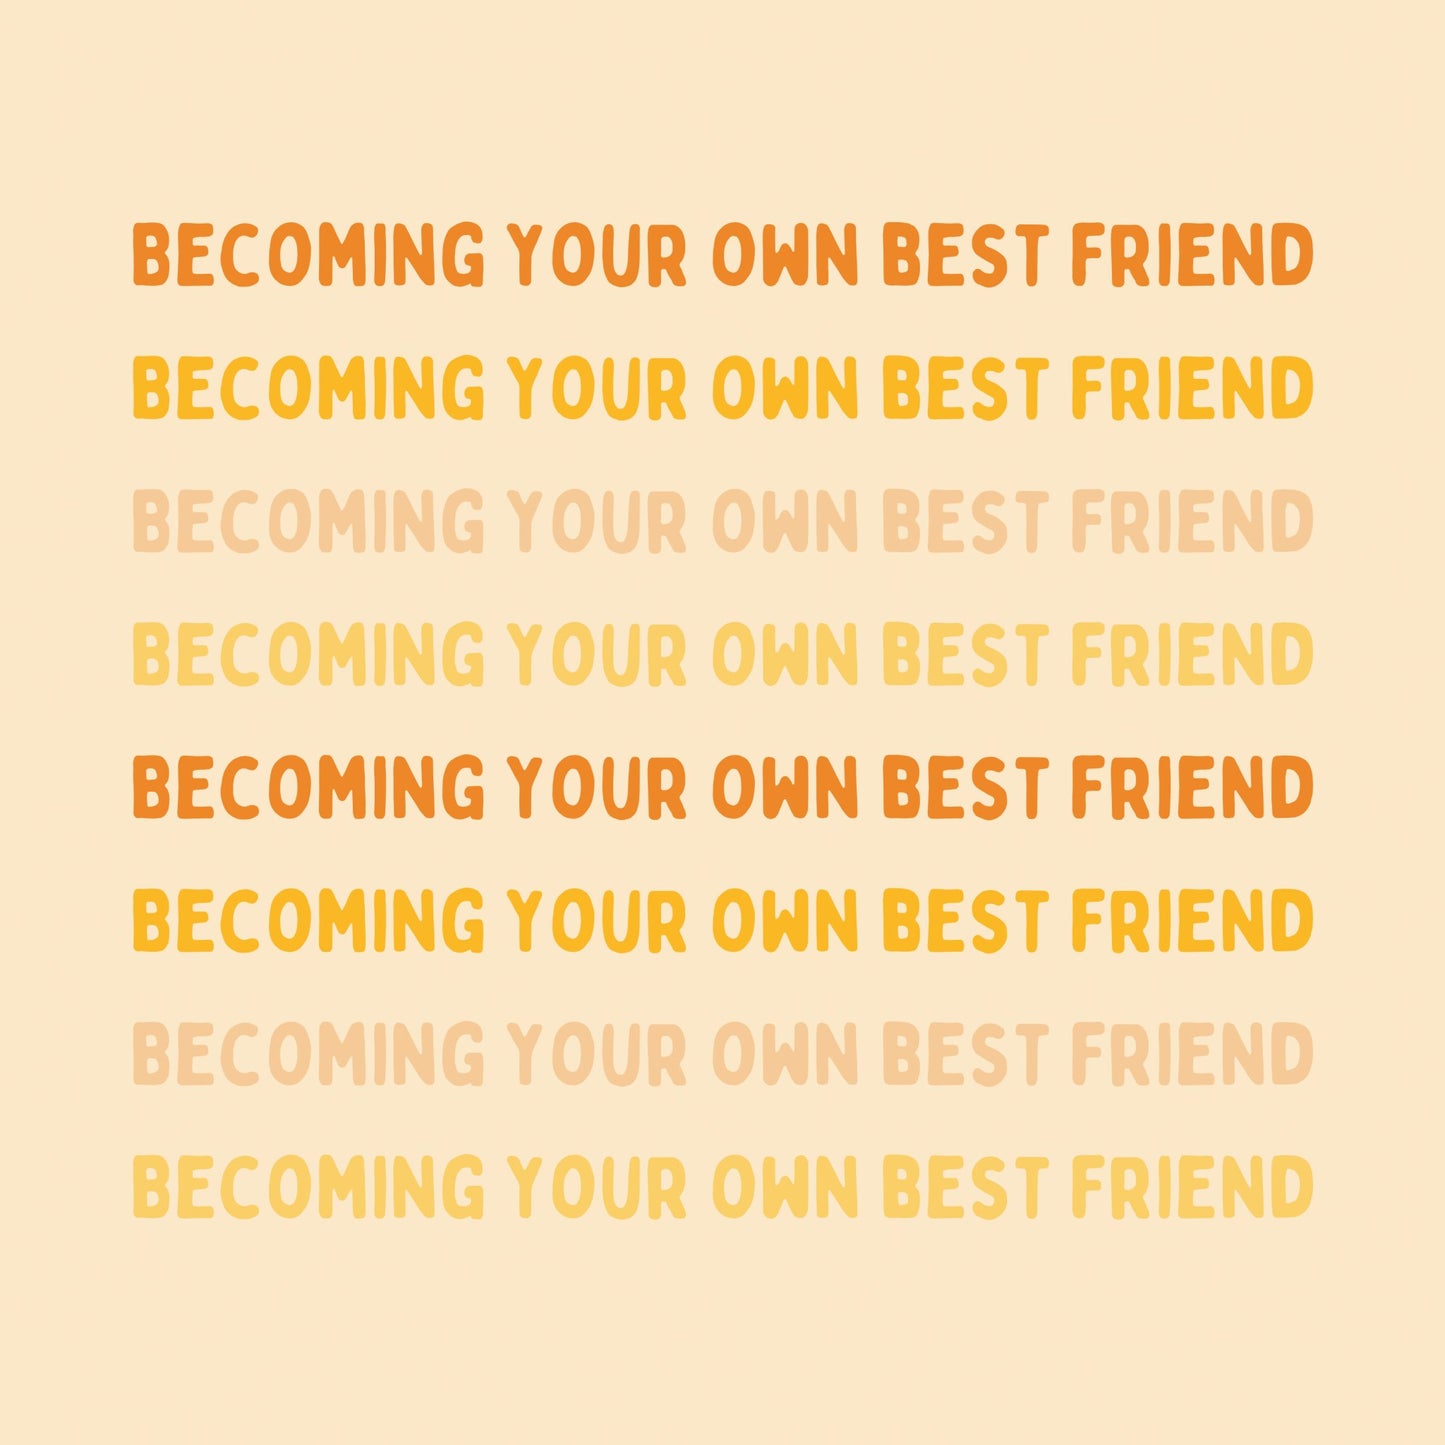 Becoming Your Own Best Friend Workshop - All With Heart